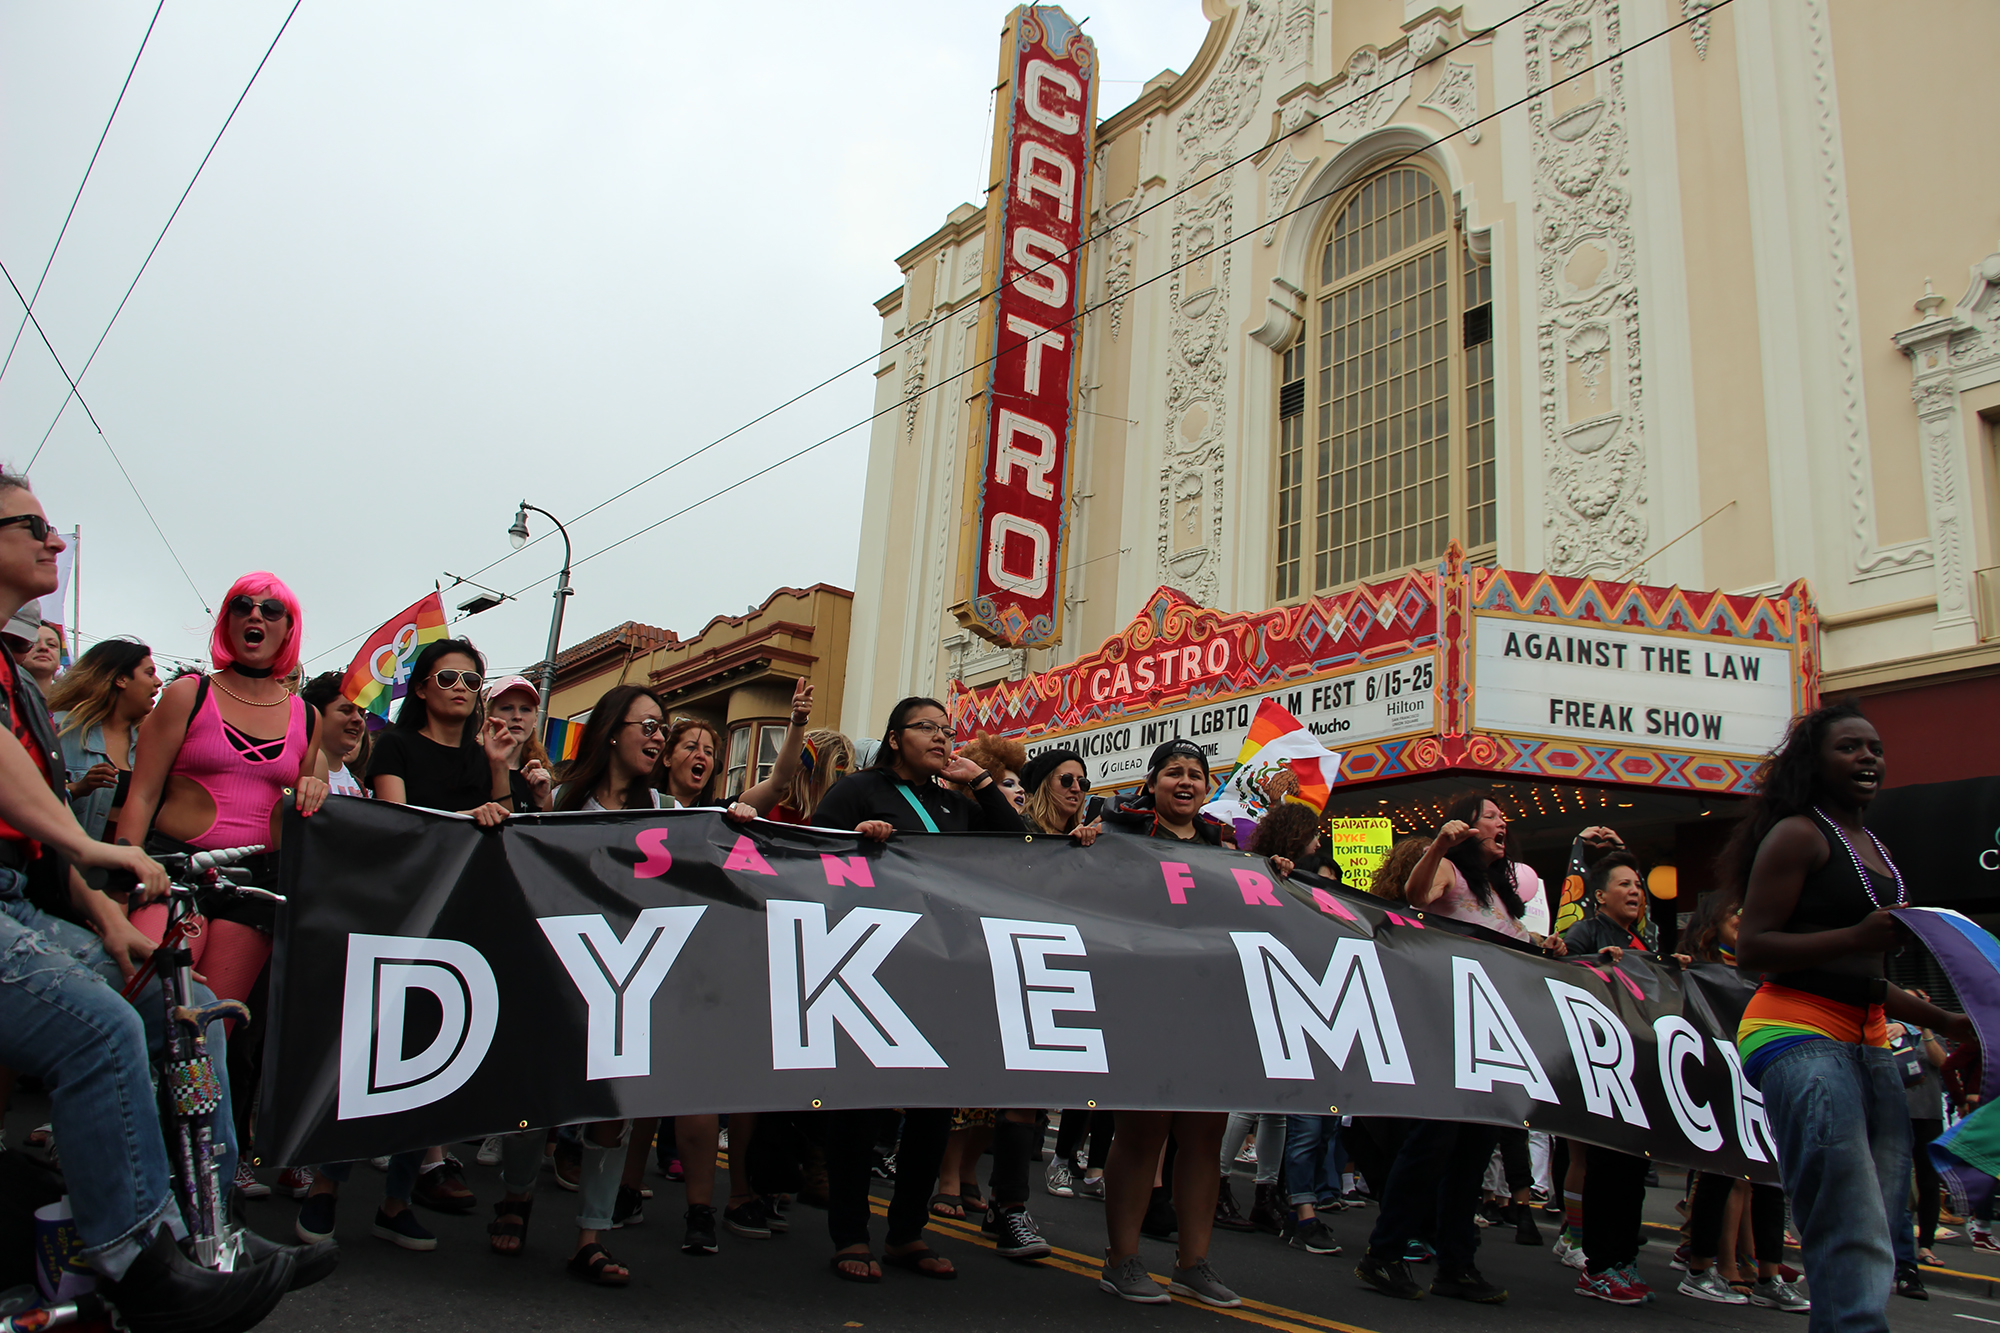 Dyke March makes its way down Castro Street